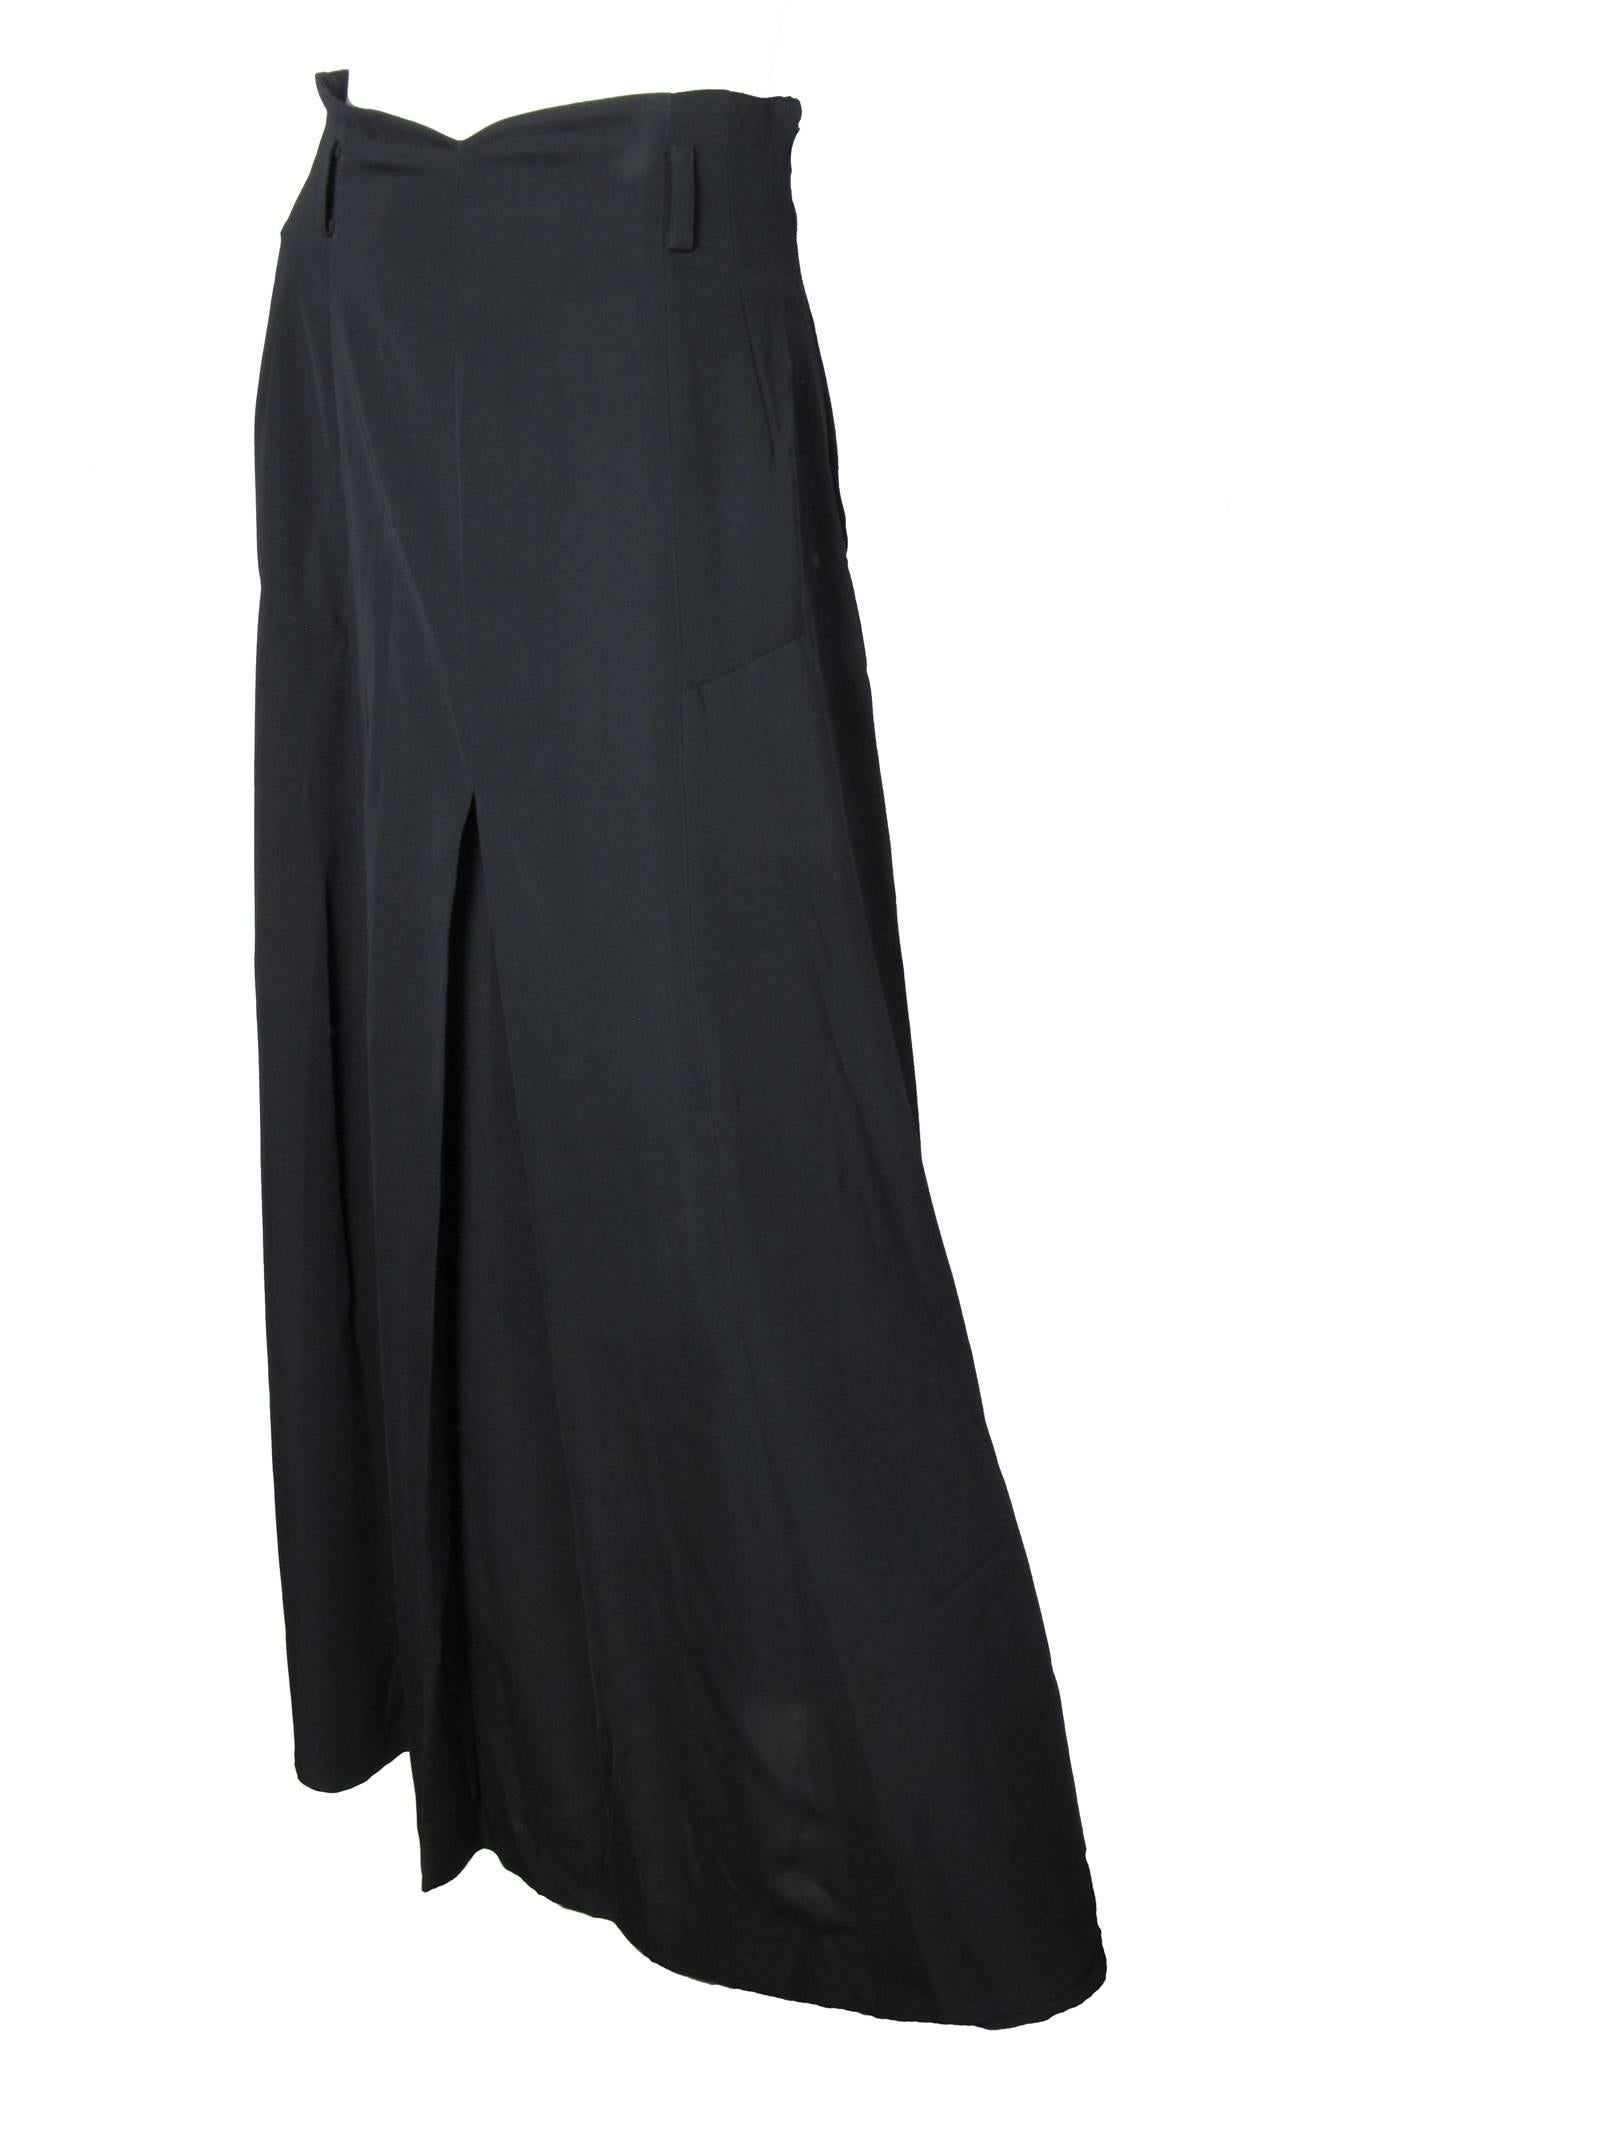 Matsuda black polyester skirt with pleating at back.   Condition: Very good, missing belt.  Made in Japan.  Size Medium

27